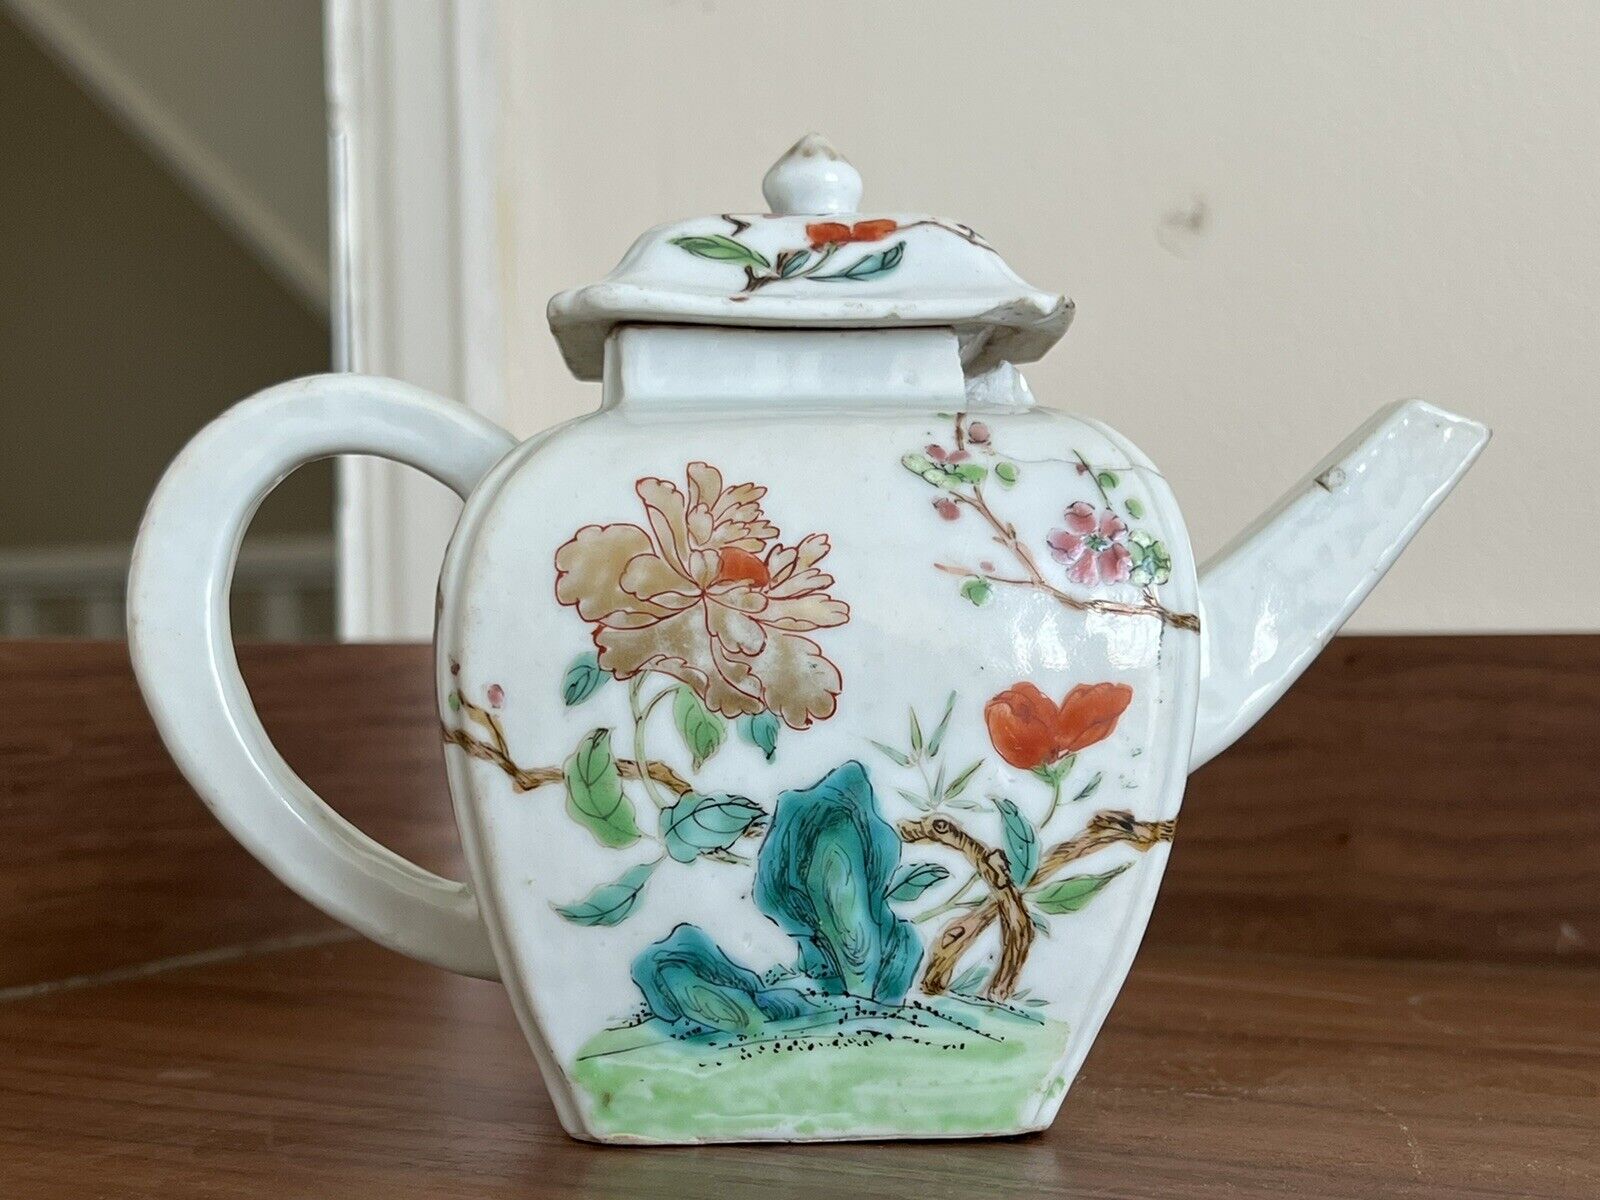 Antique Valuations: Antique Chinese 18th century teapot as found